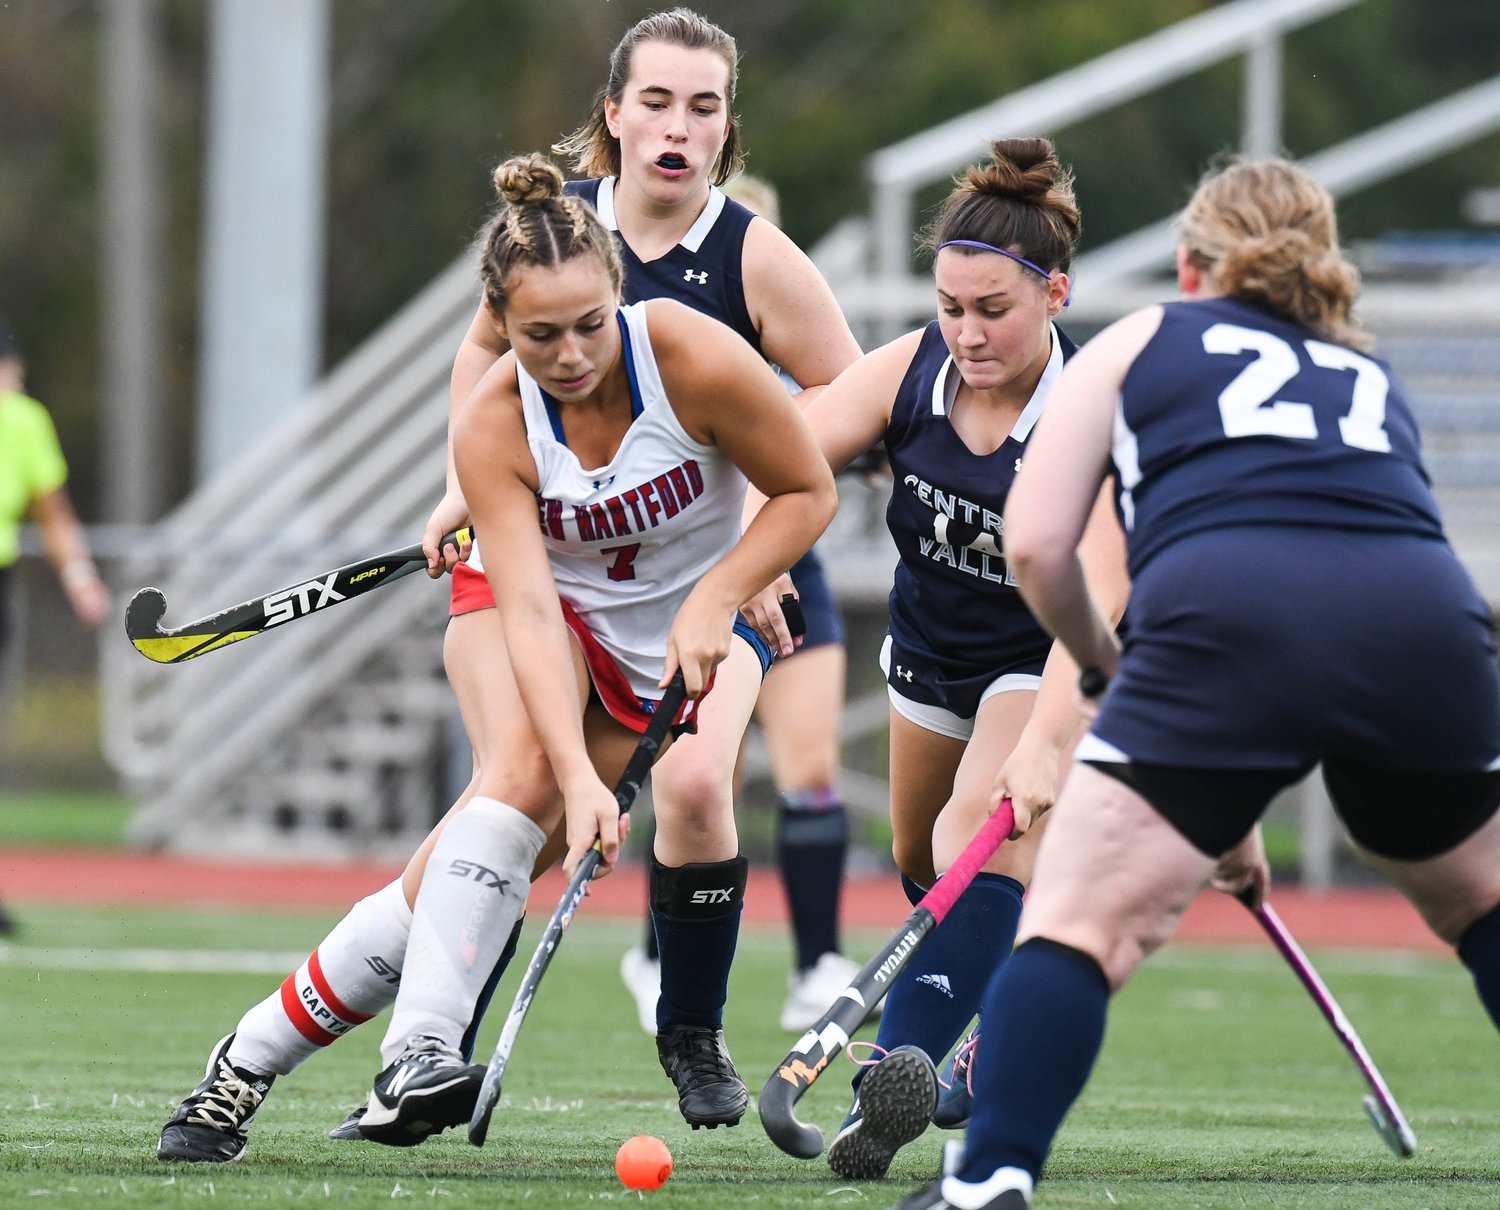 New Hartford player Ella Greico makes a move during the field hockey game against Central Valley Academy on Wednesday. Greico scored three goals in New Hartford’s 3-0 win.